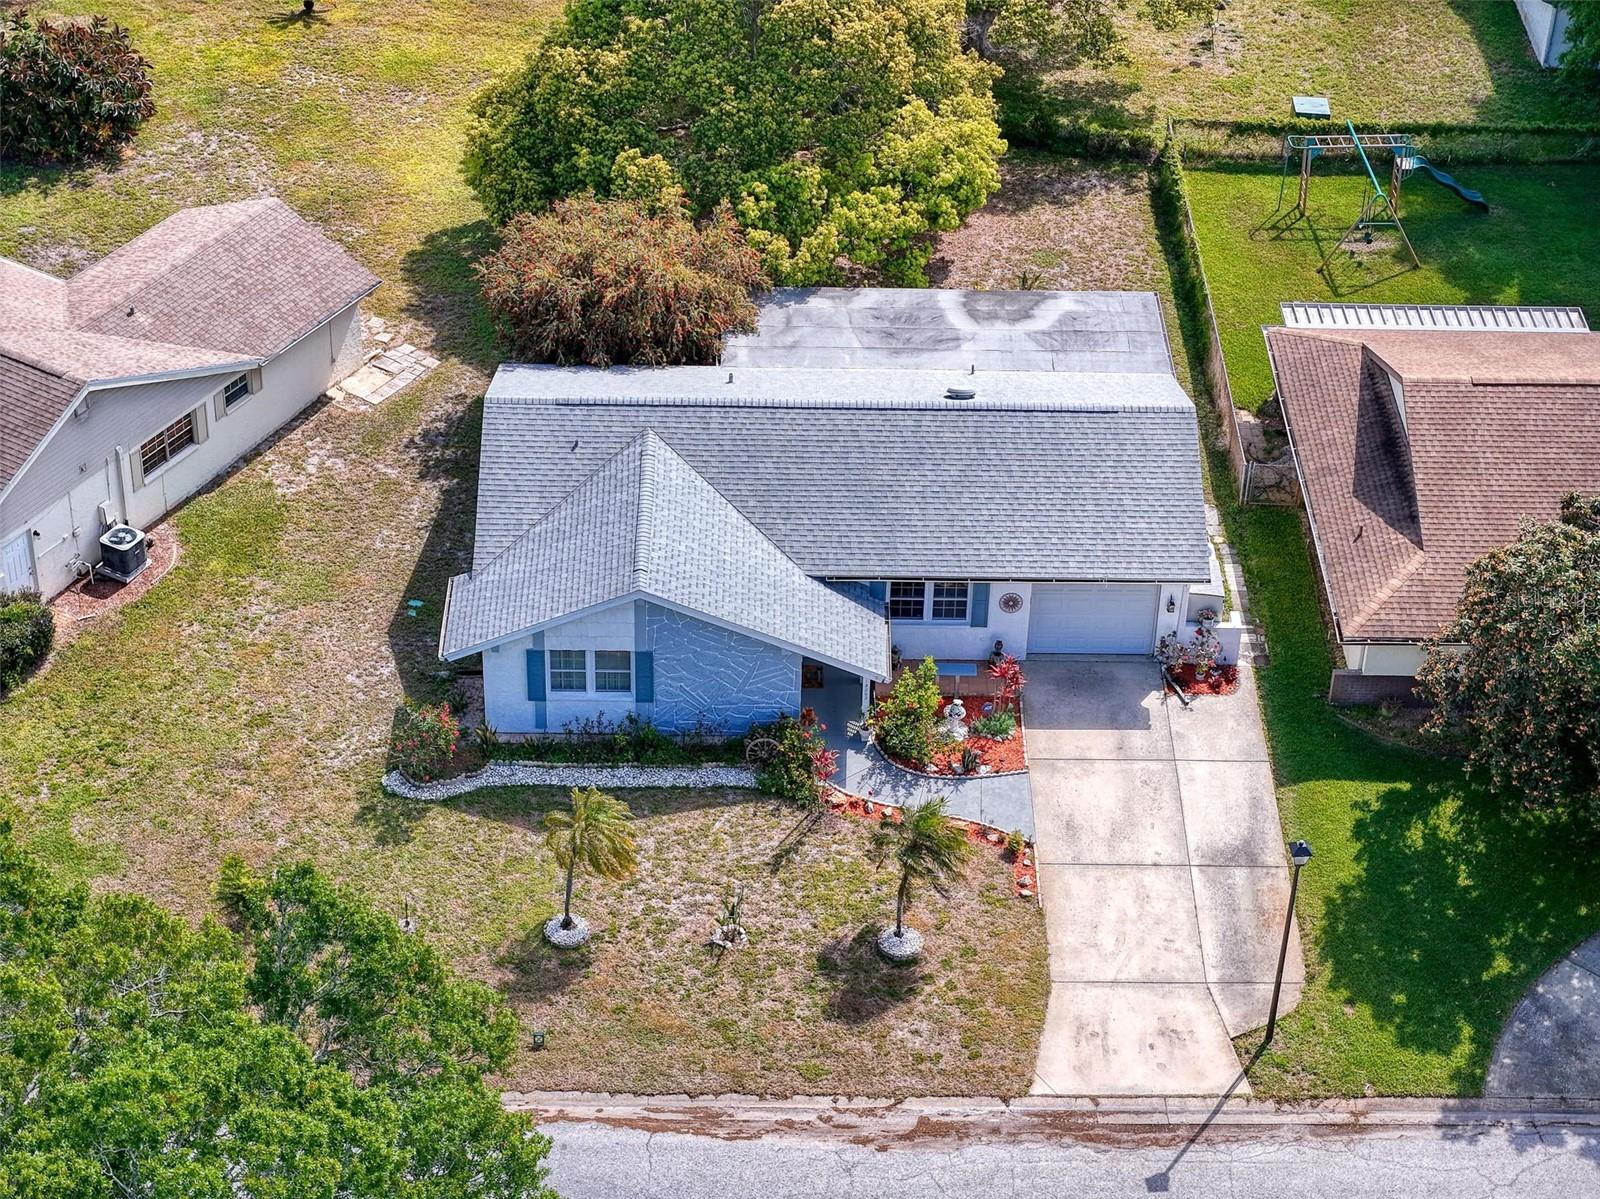 Overhead view of home.